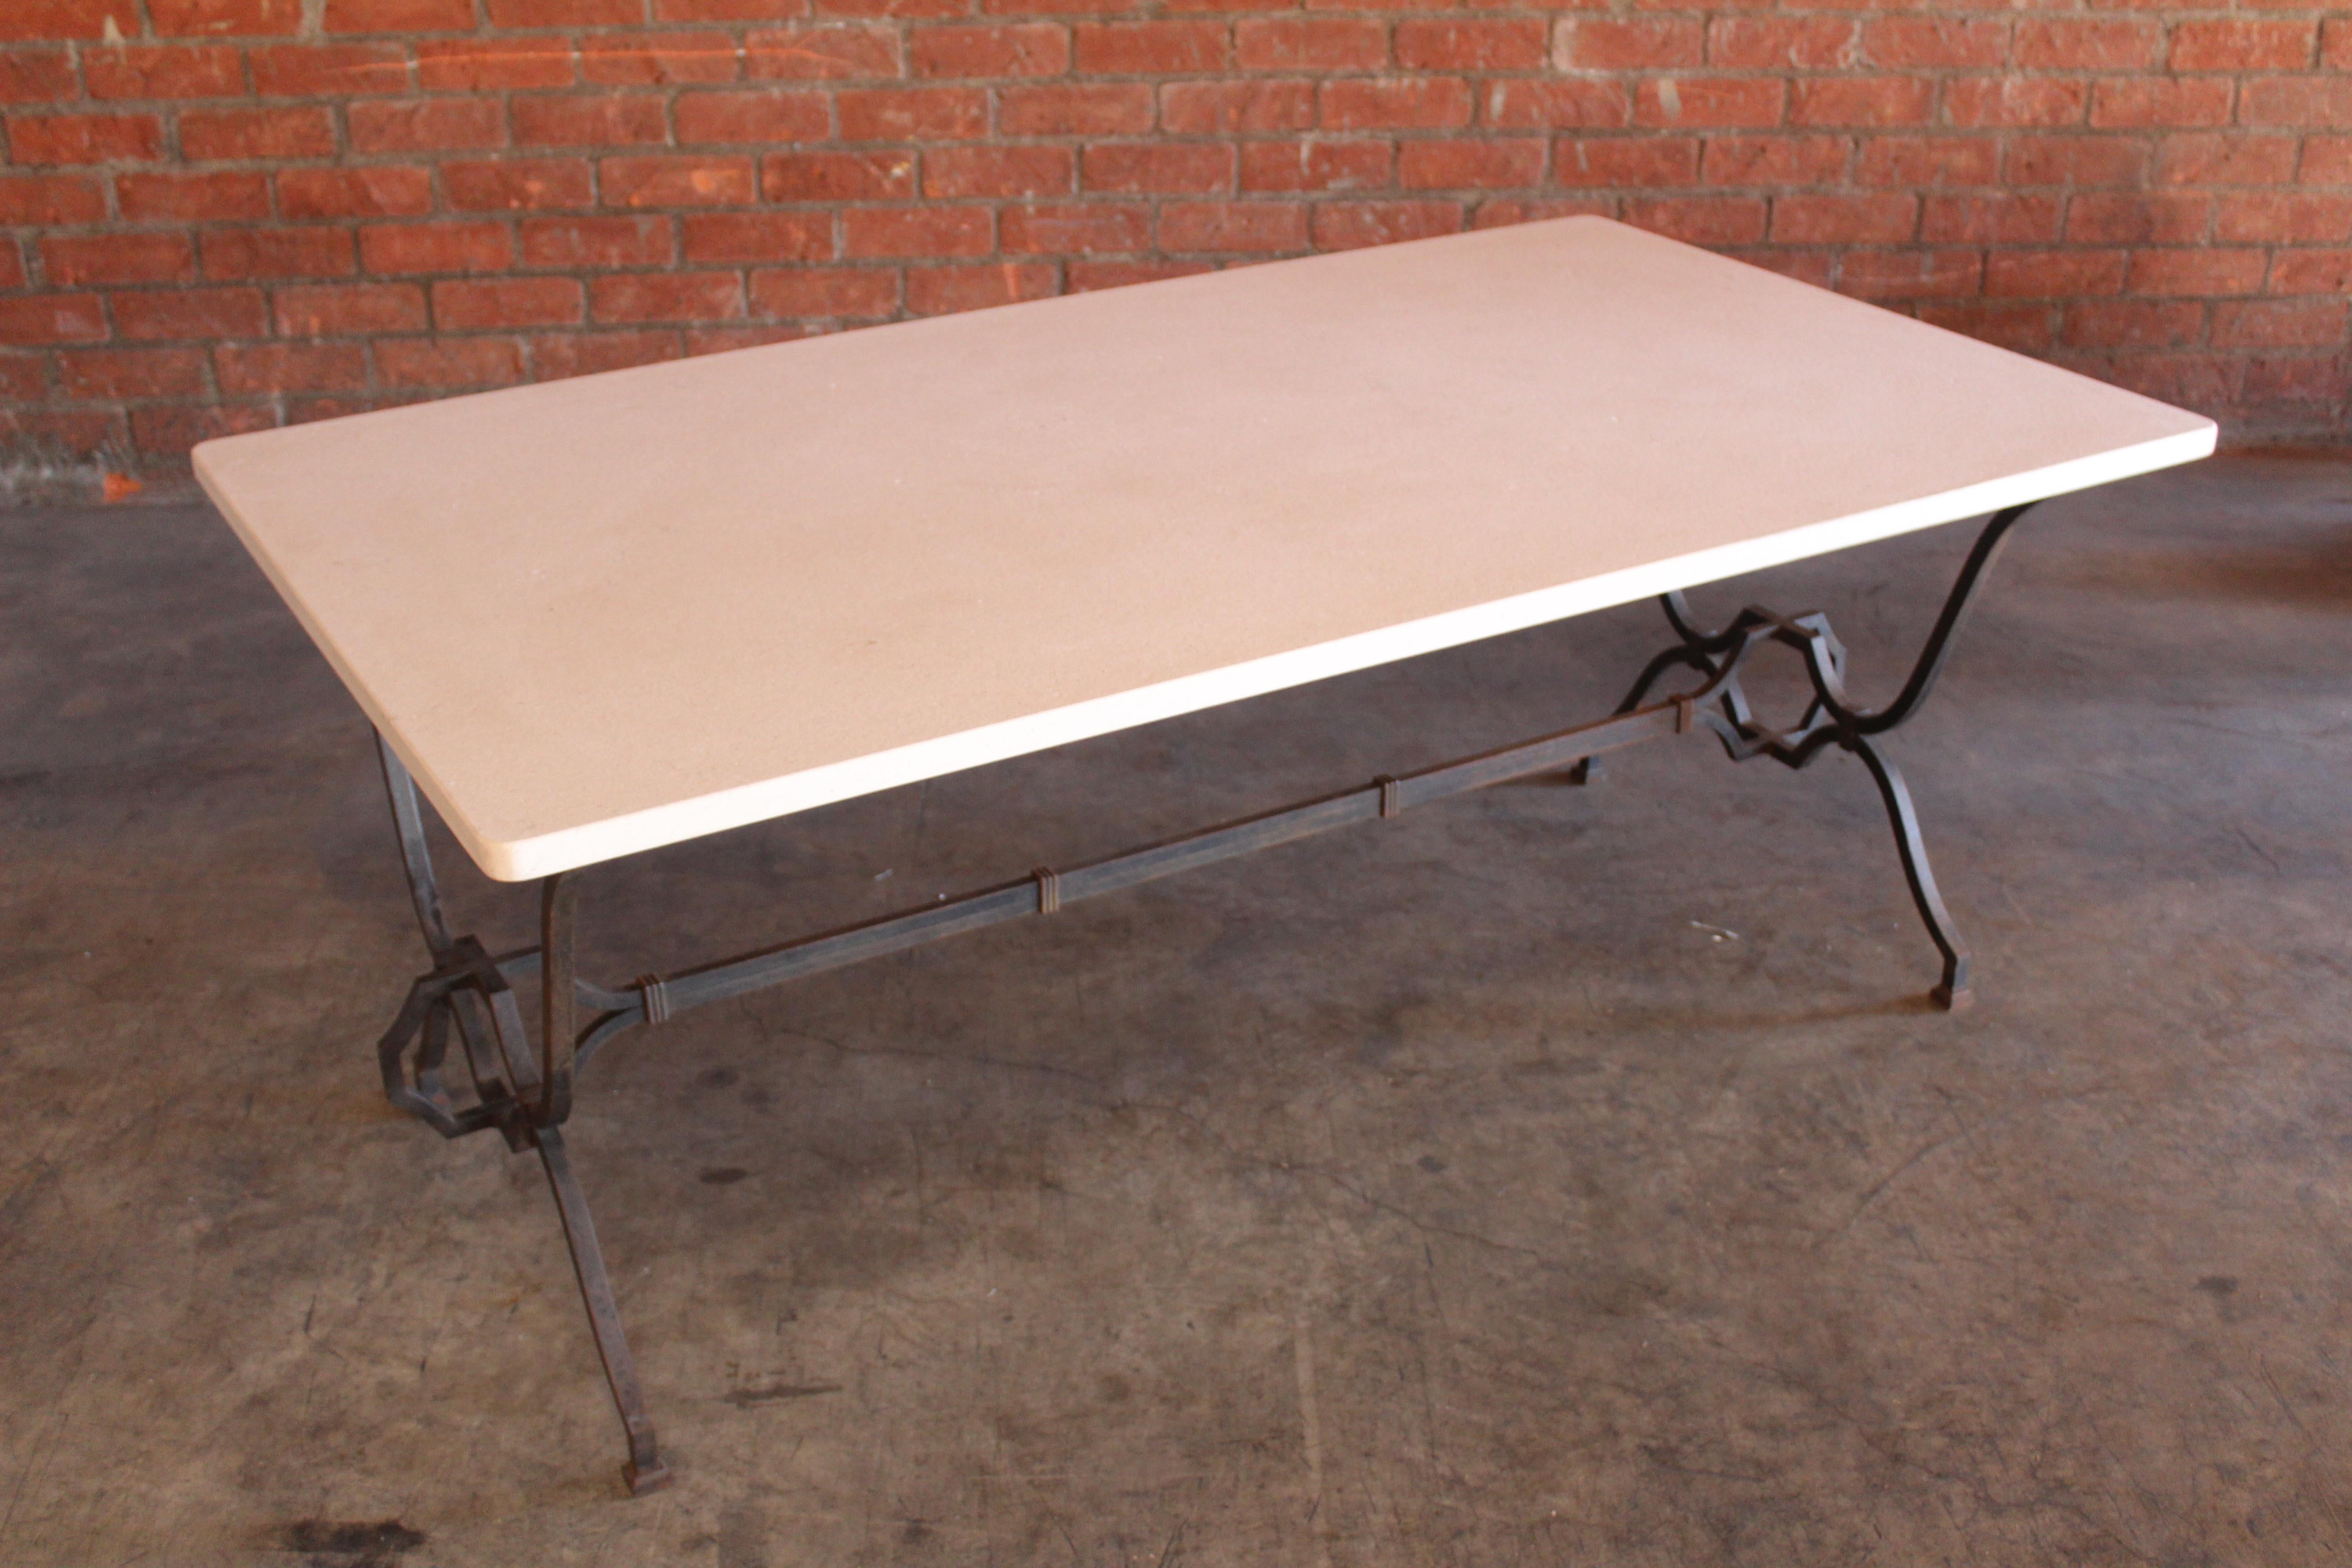 1940s French Wrought Iron and Limestone Table by Colette Gueden for René Prou For Sale 1